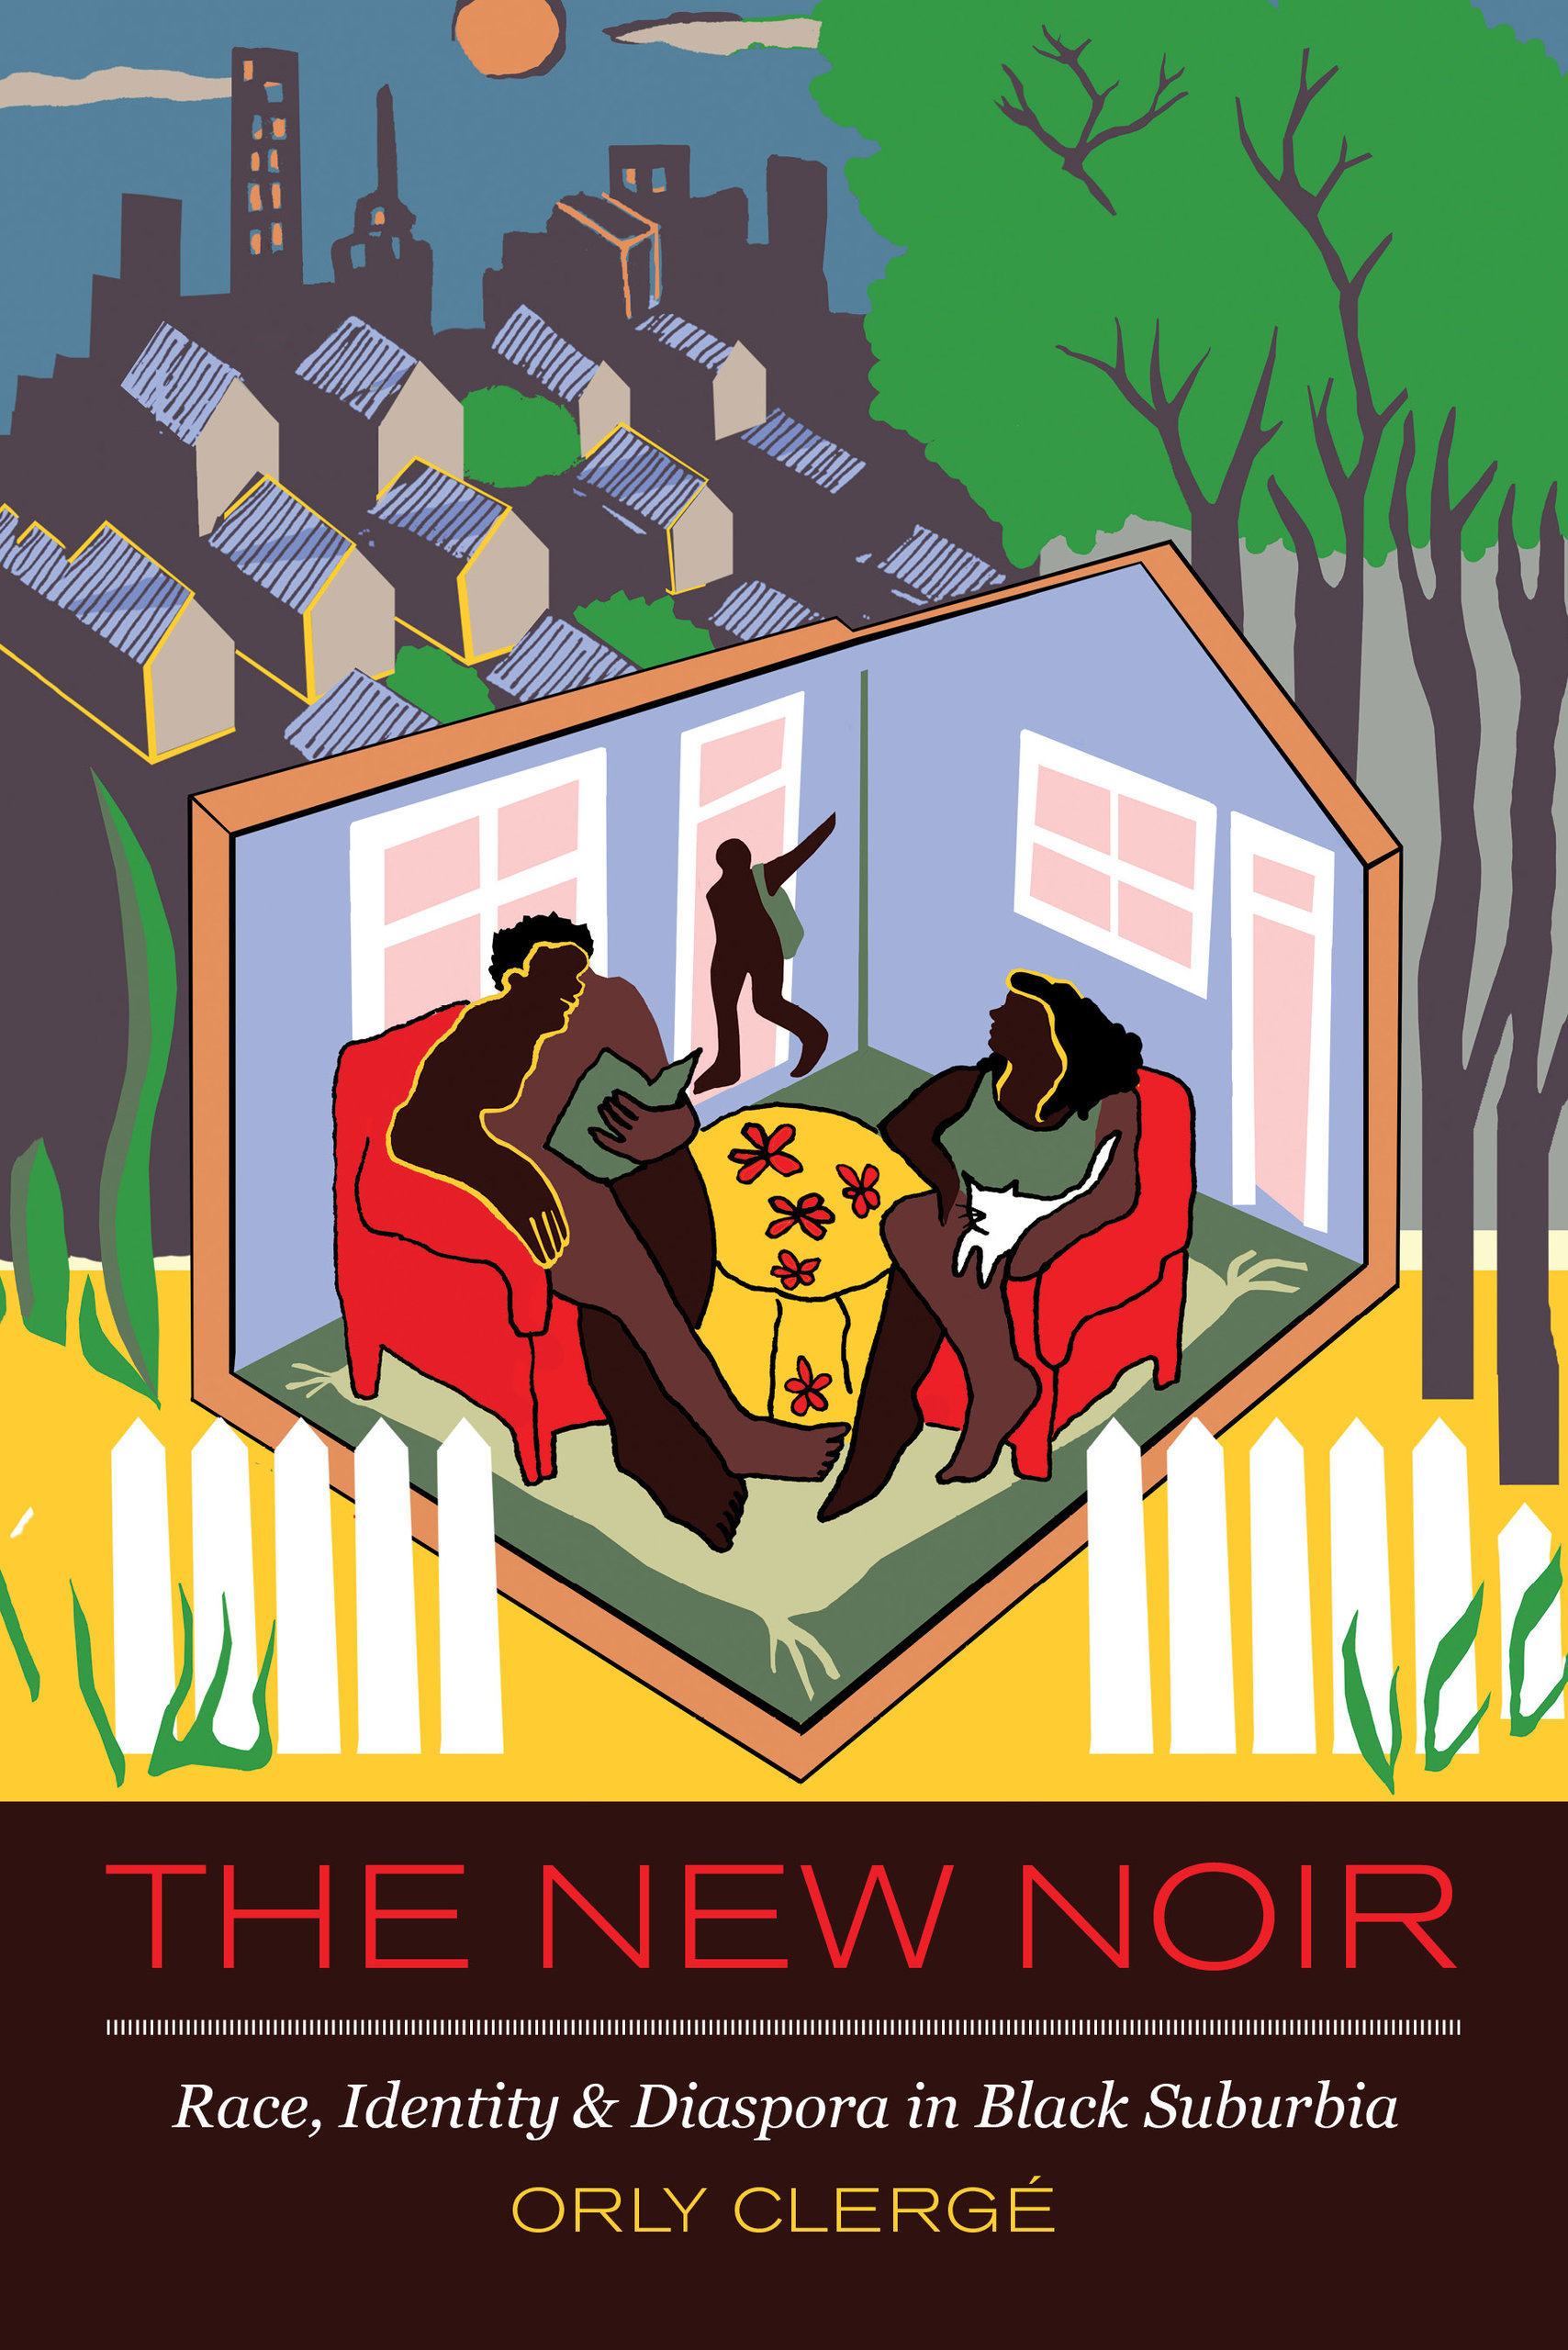 Cover of book, the New Noir, with illustration of African American family in living room, suburbs and city scape behind their home 